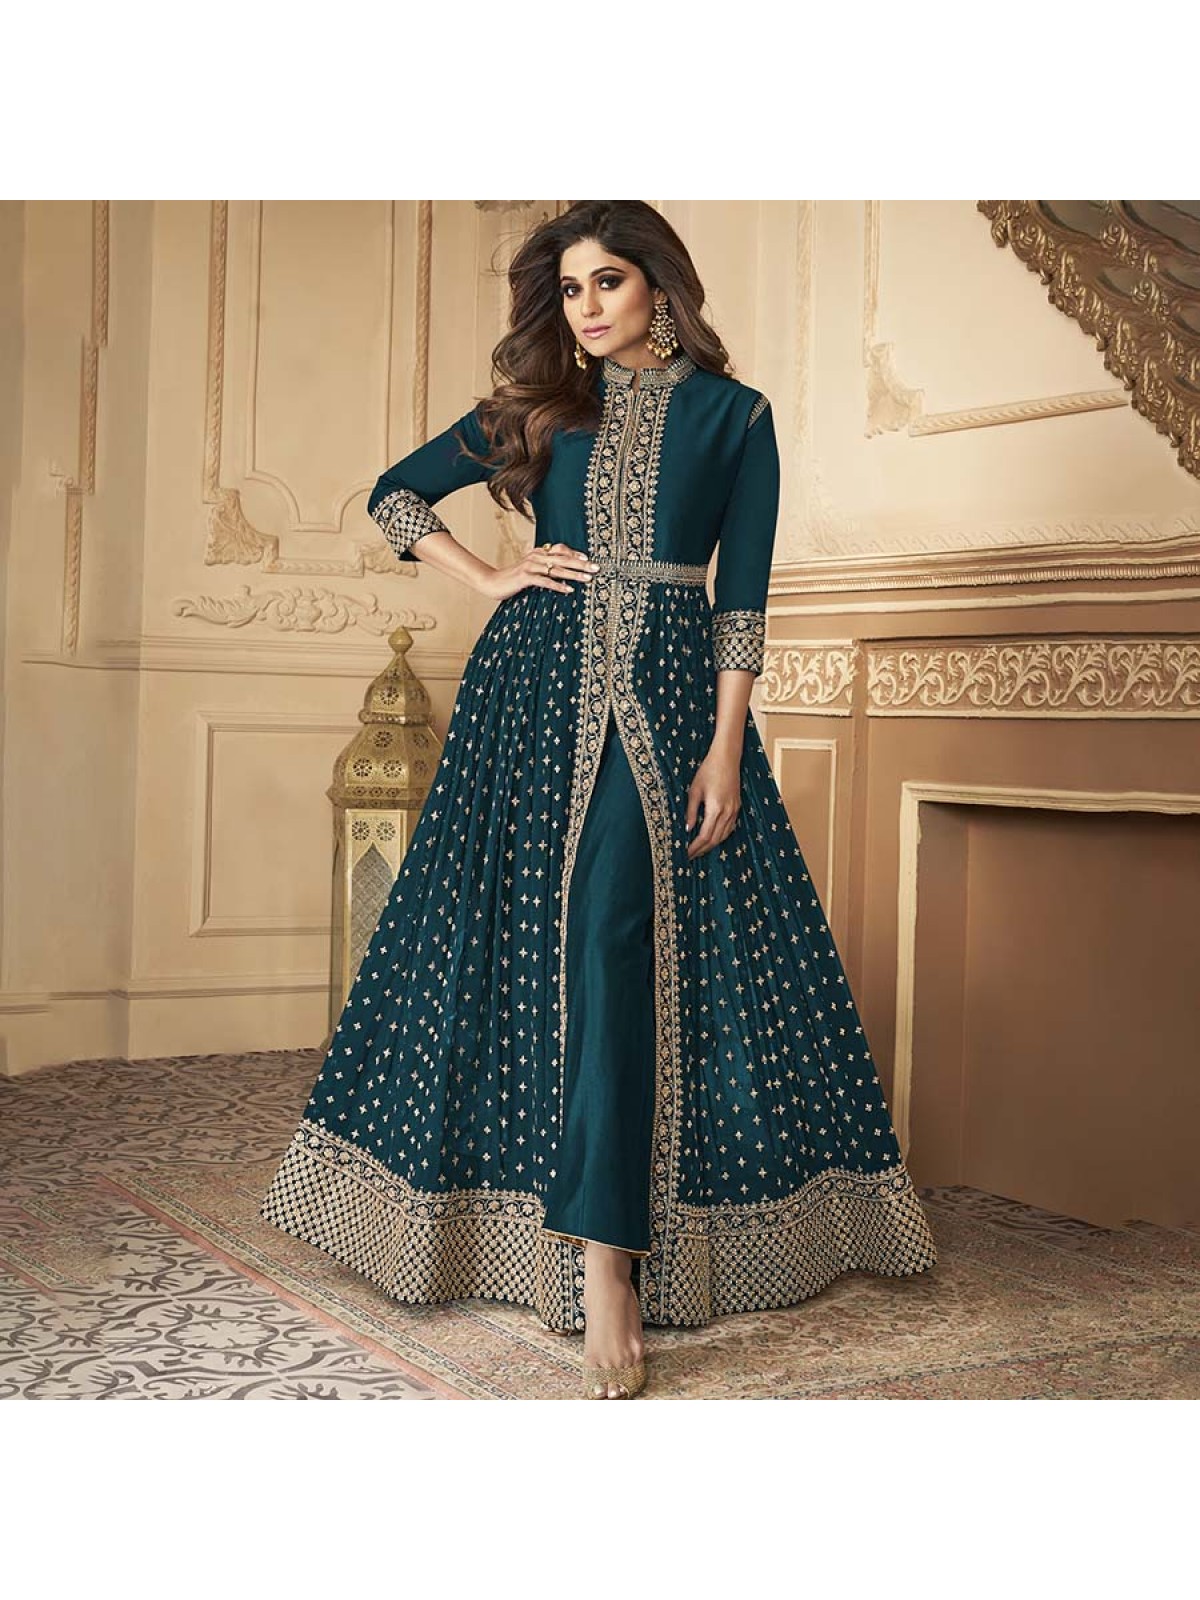 Teal Blue Colour Georgette Fabric palazzo Salwar Suit.